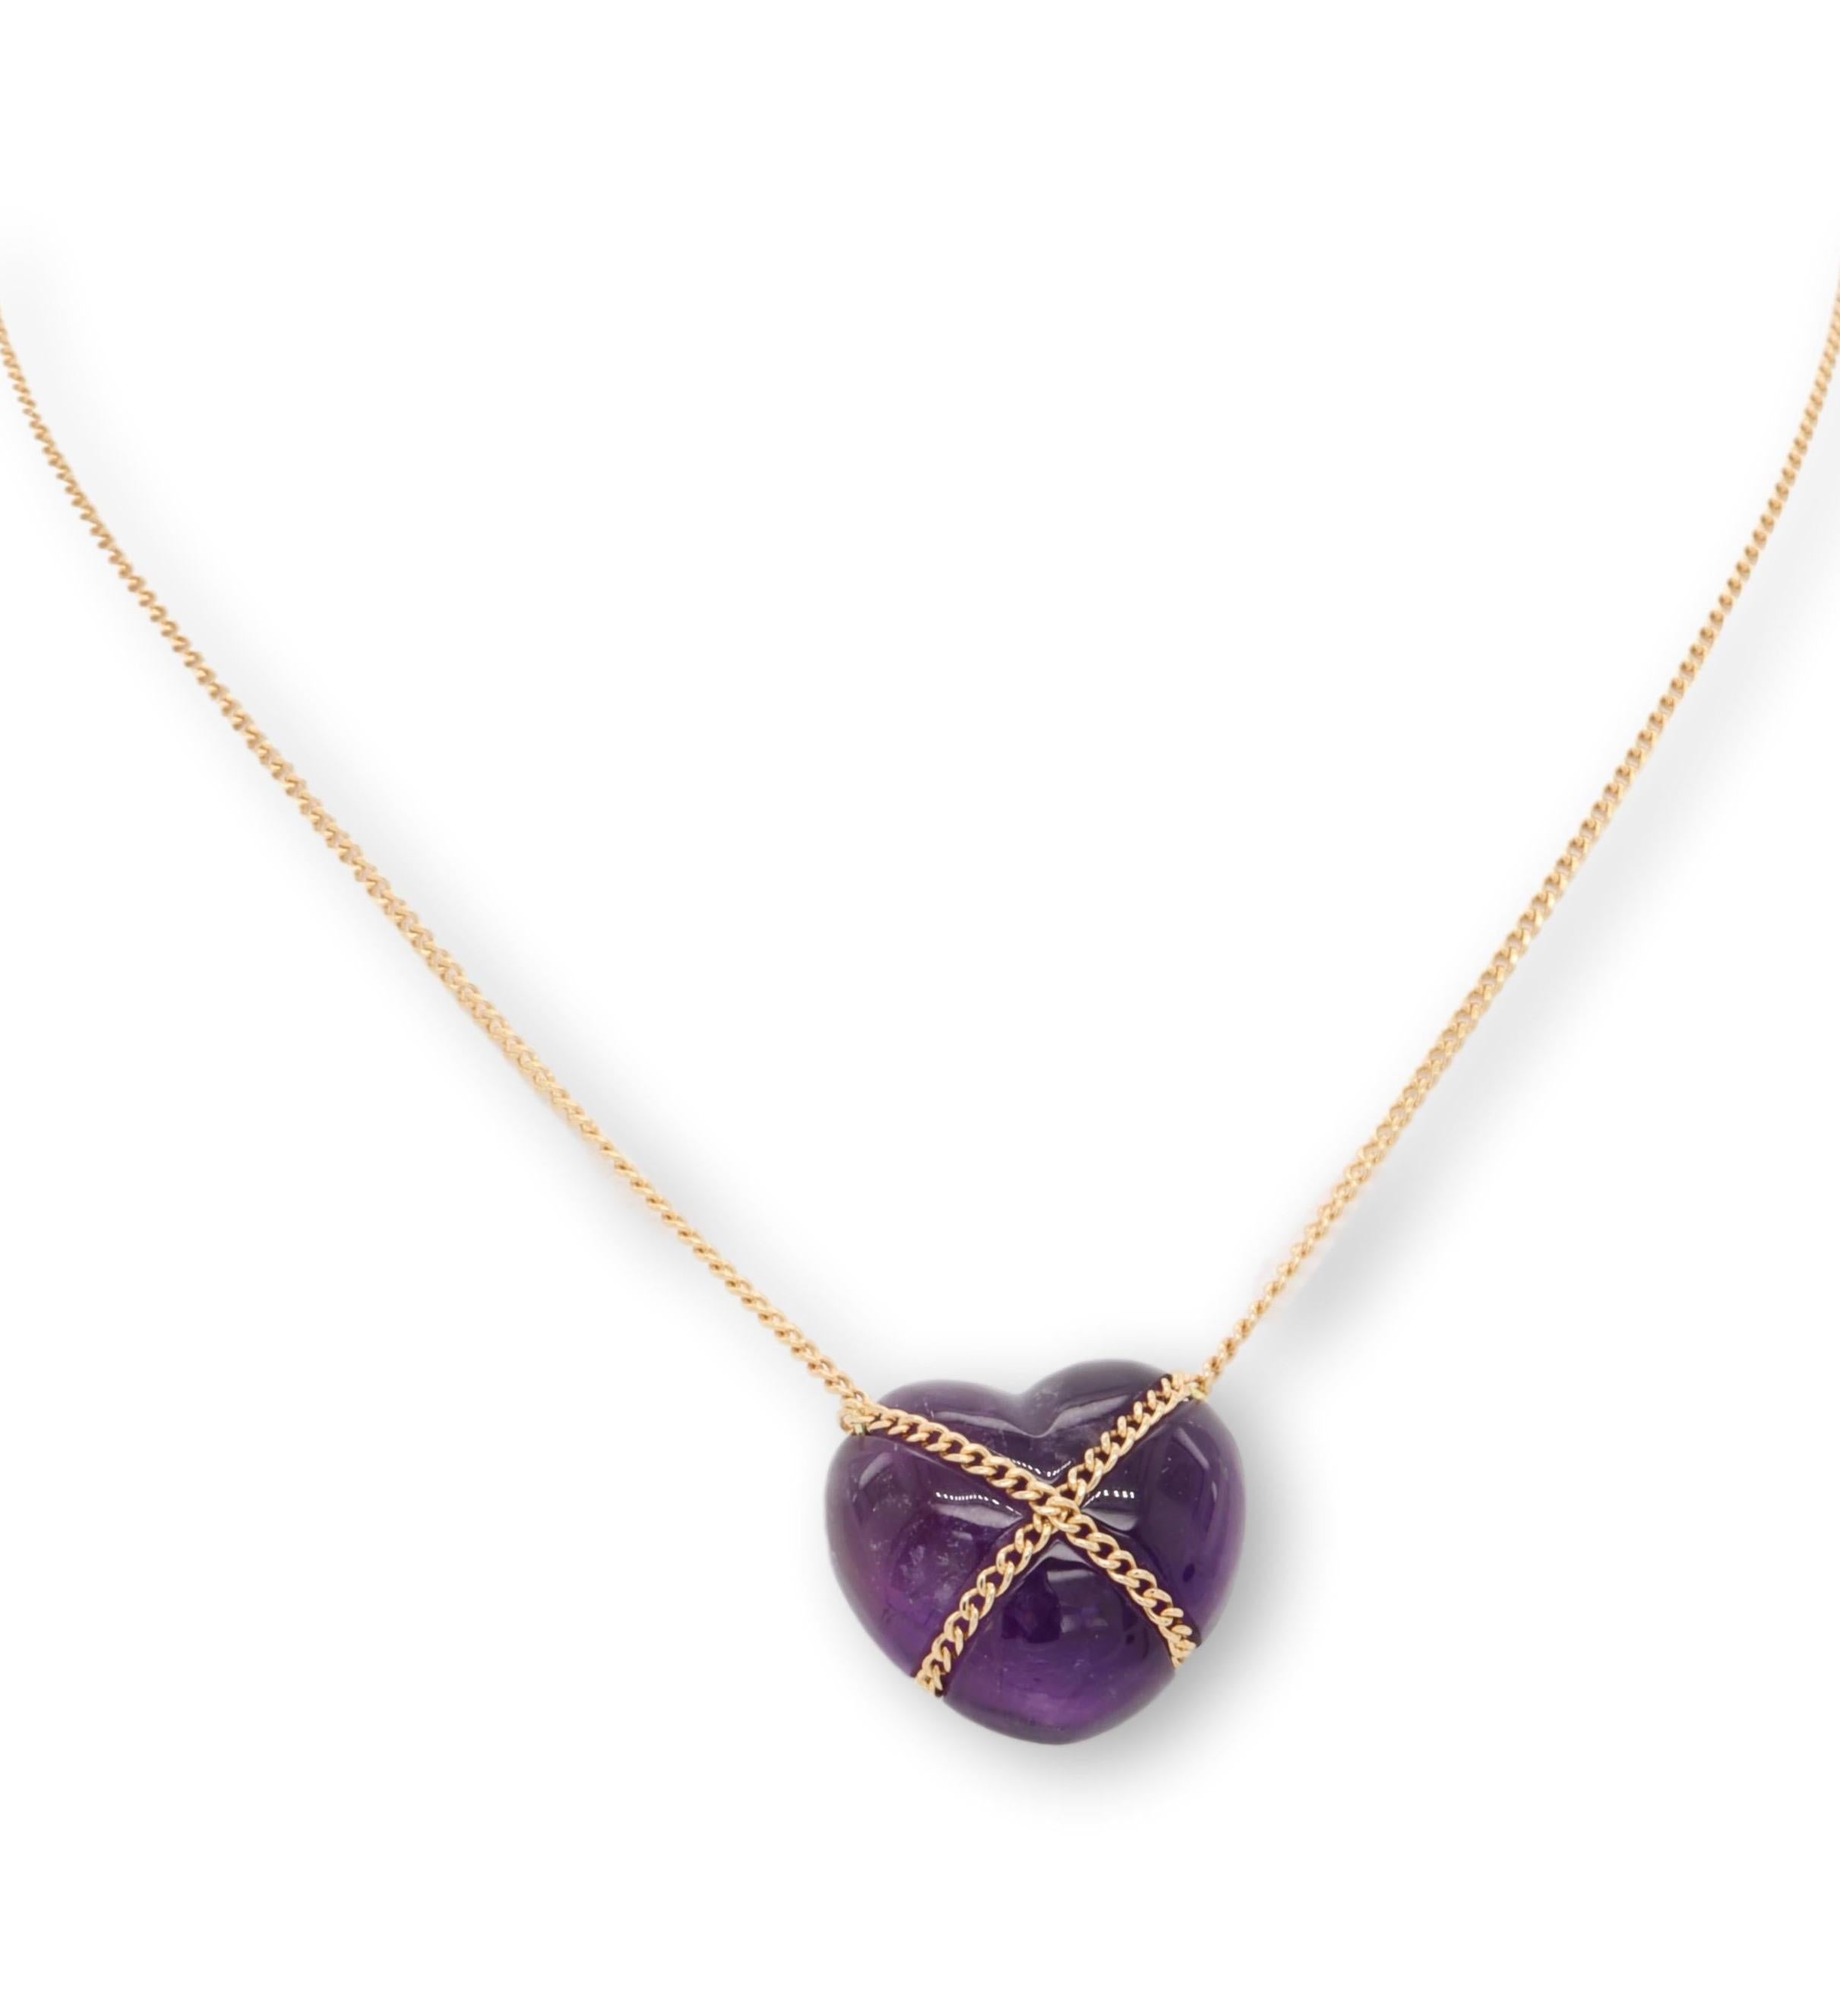 Tiffany & Co. vintage pendant necklace finely crafted in 18 karat rose gold with a cabochon amethyst heart pendant with a flat bottom measuring 13mm hanging off a delicate 18